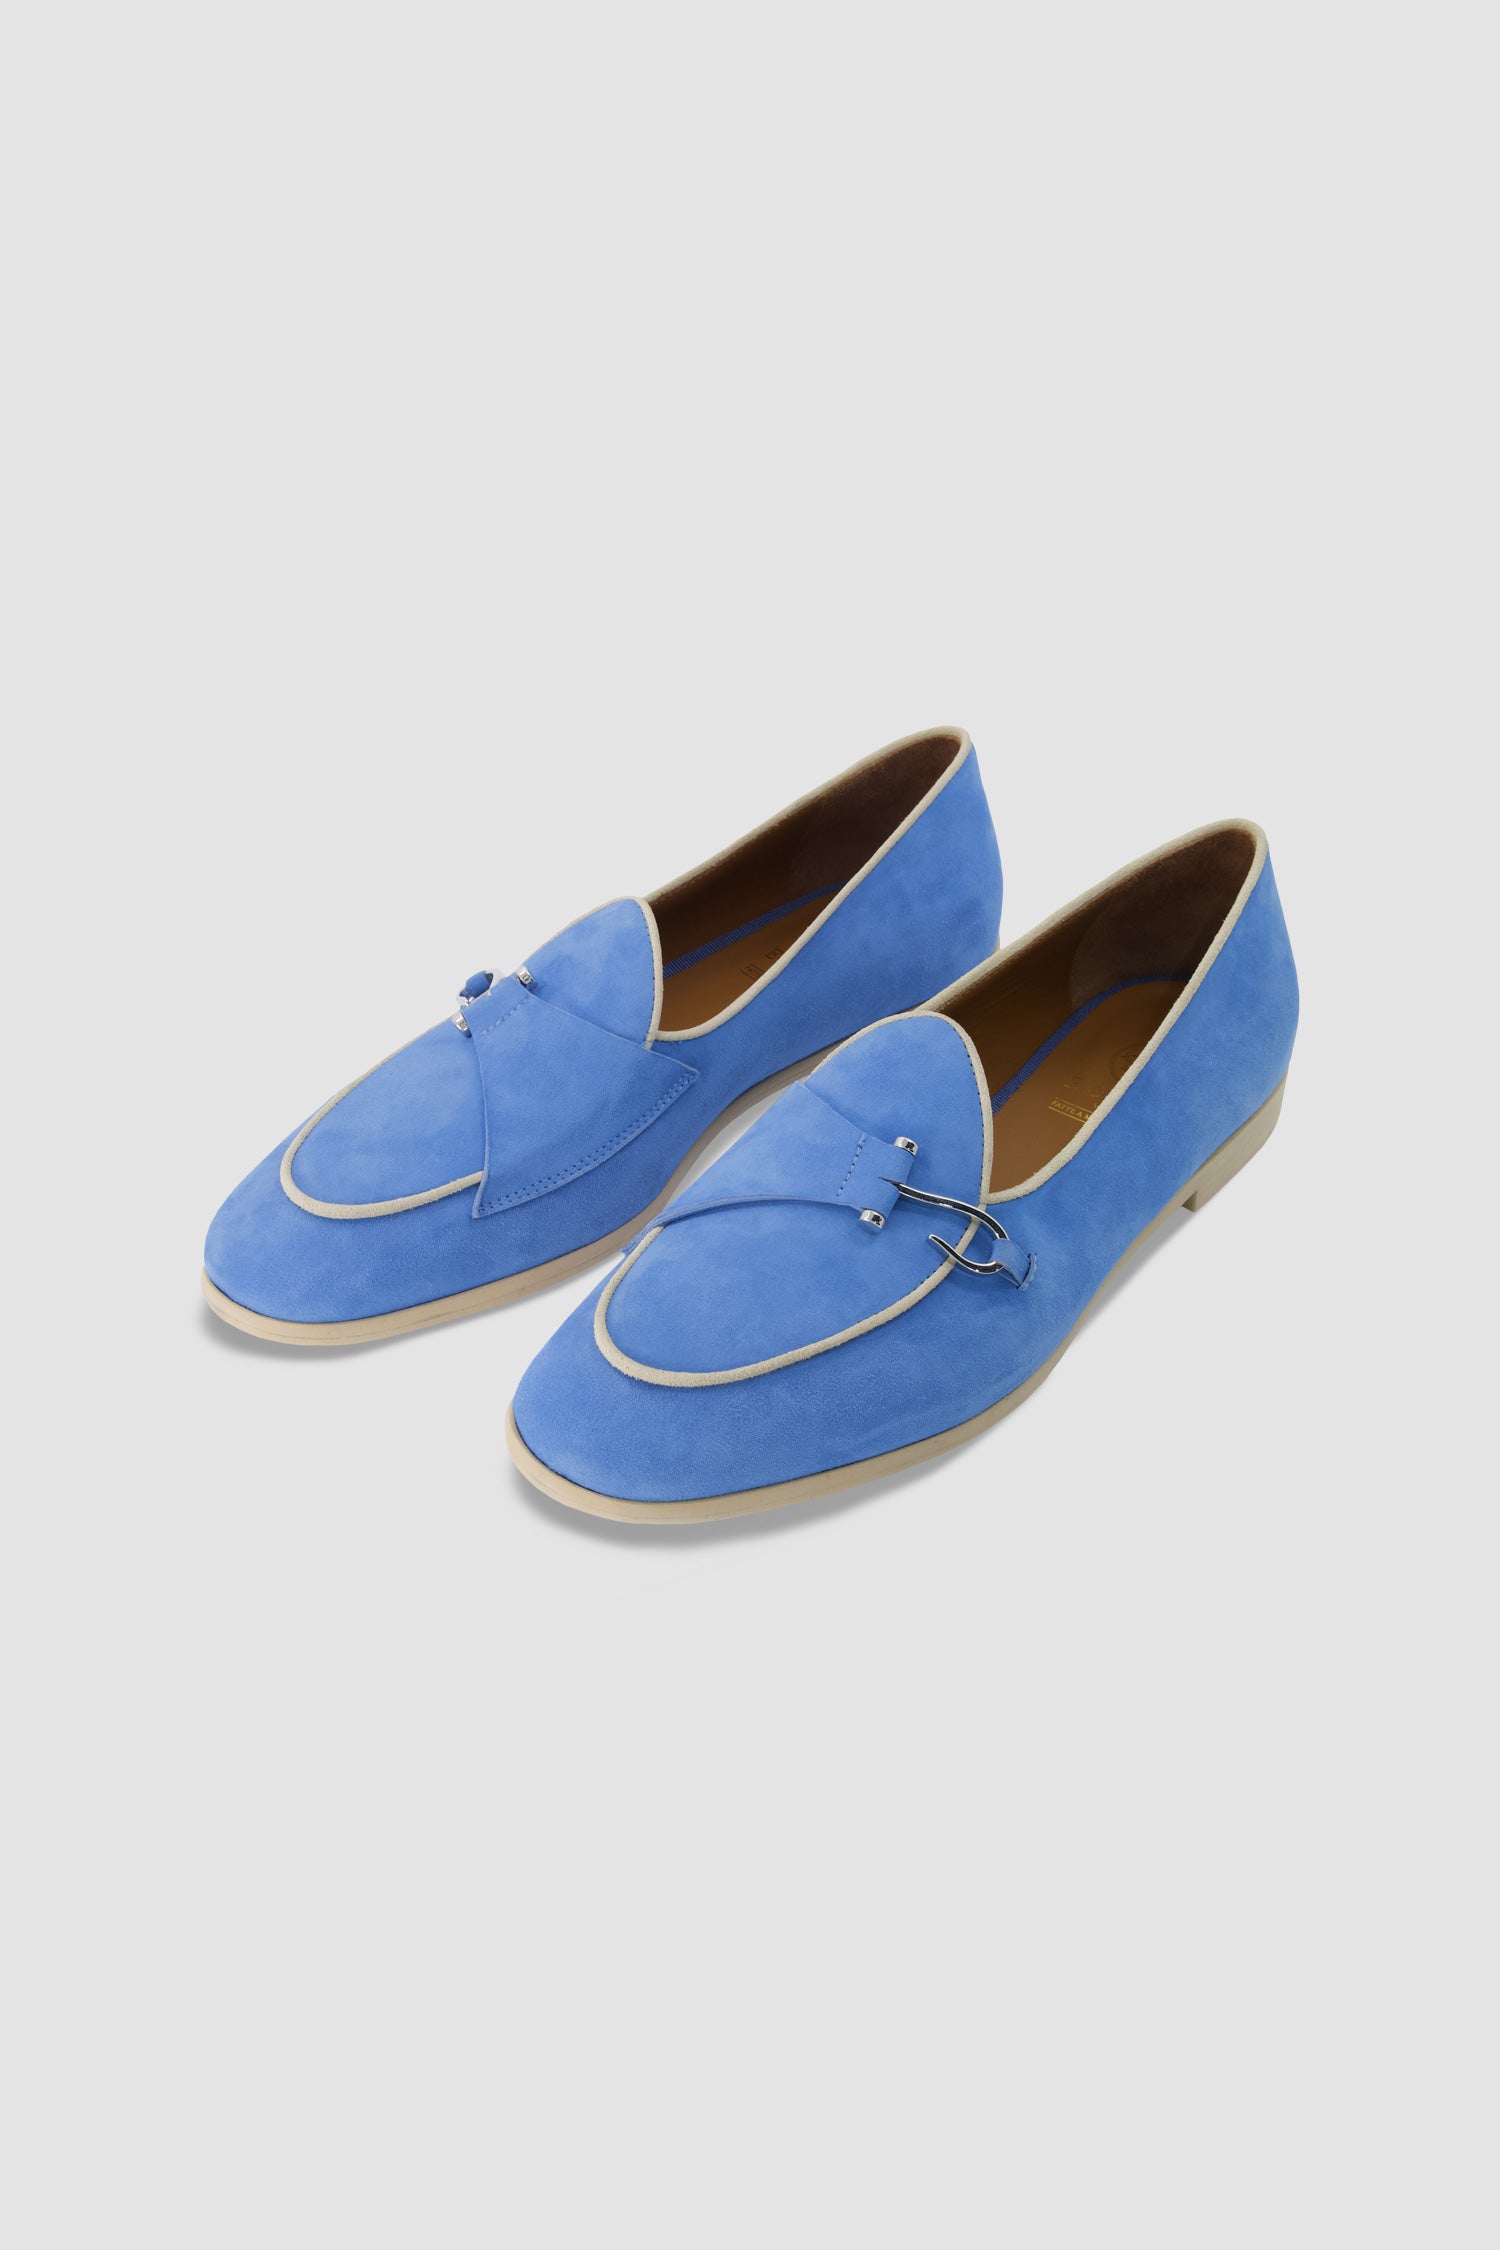 Edhen Milano Comporta Go Blue Suede Loafers